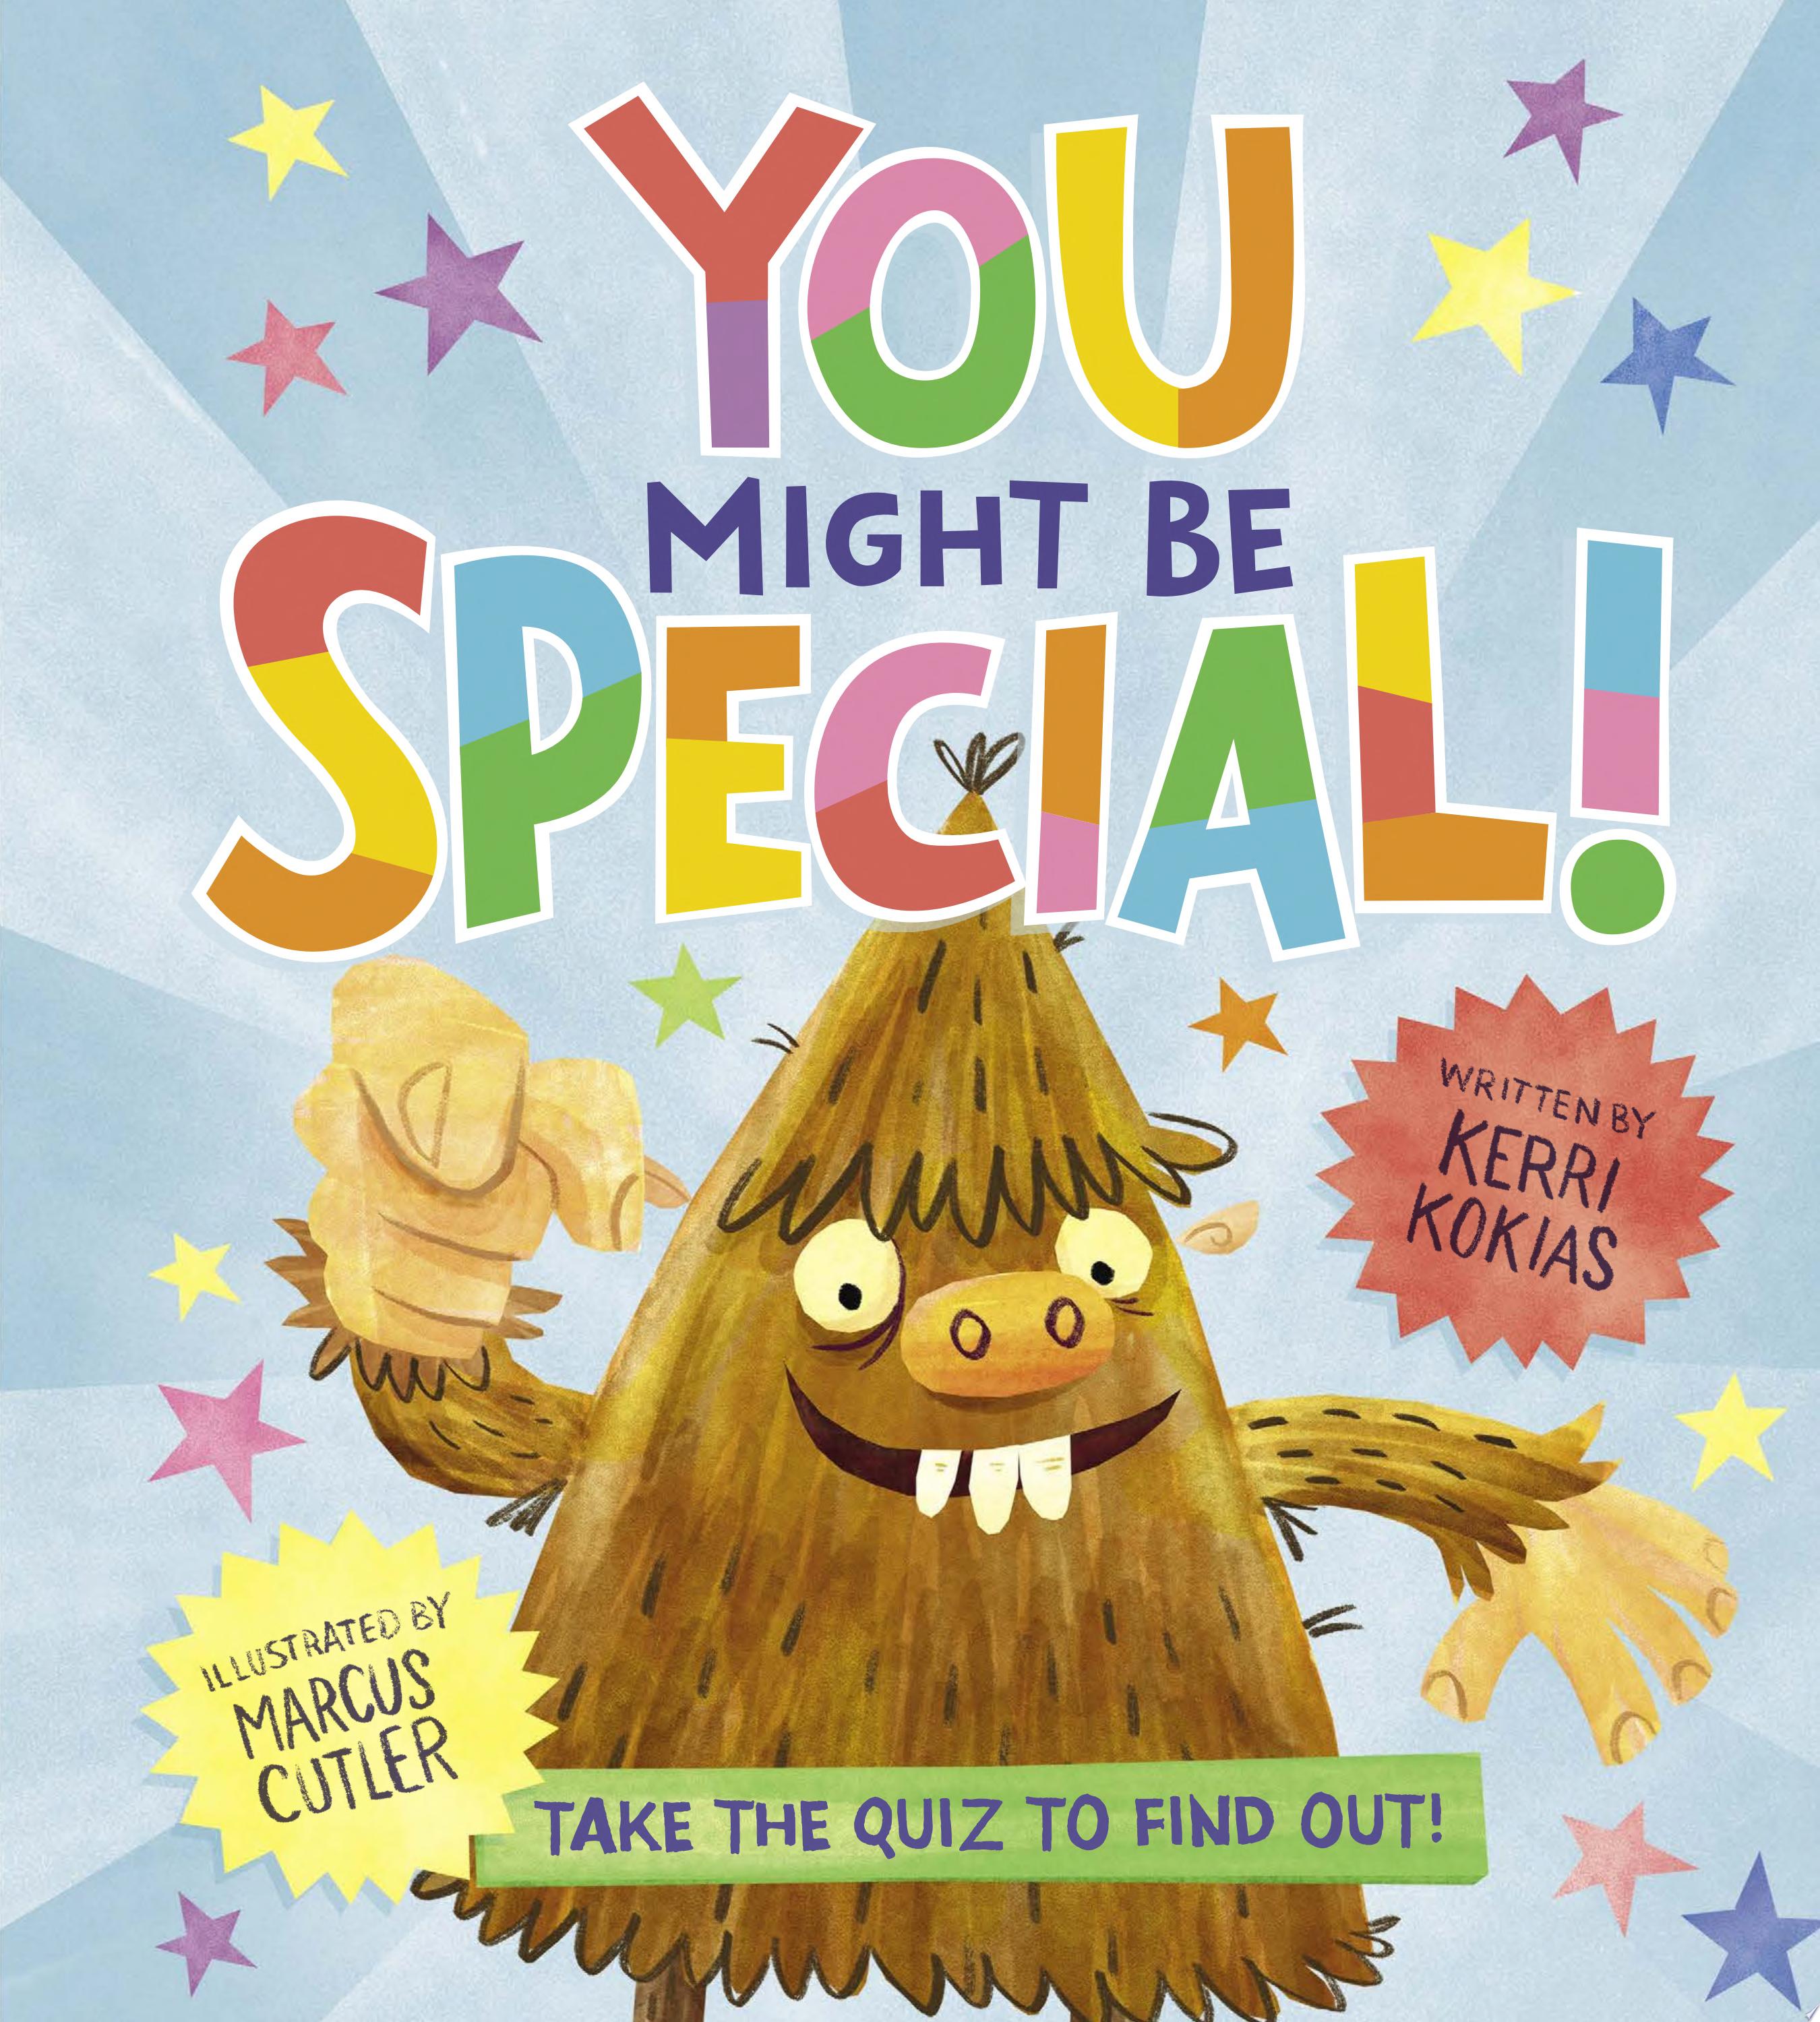 Image for "You Might Be Special!"